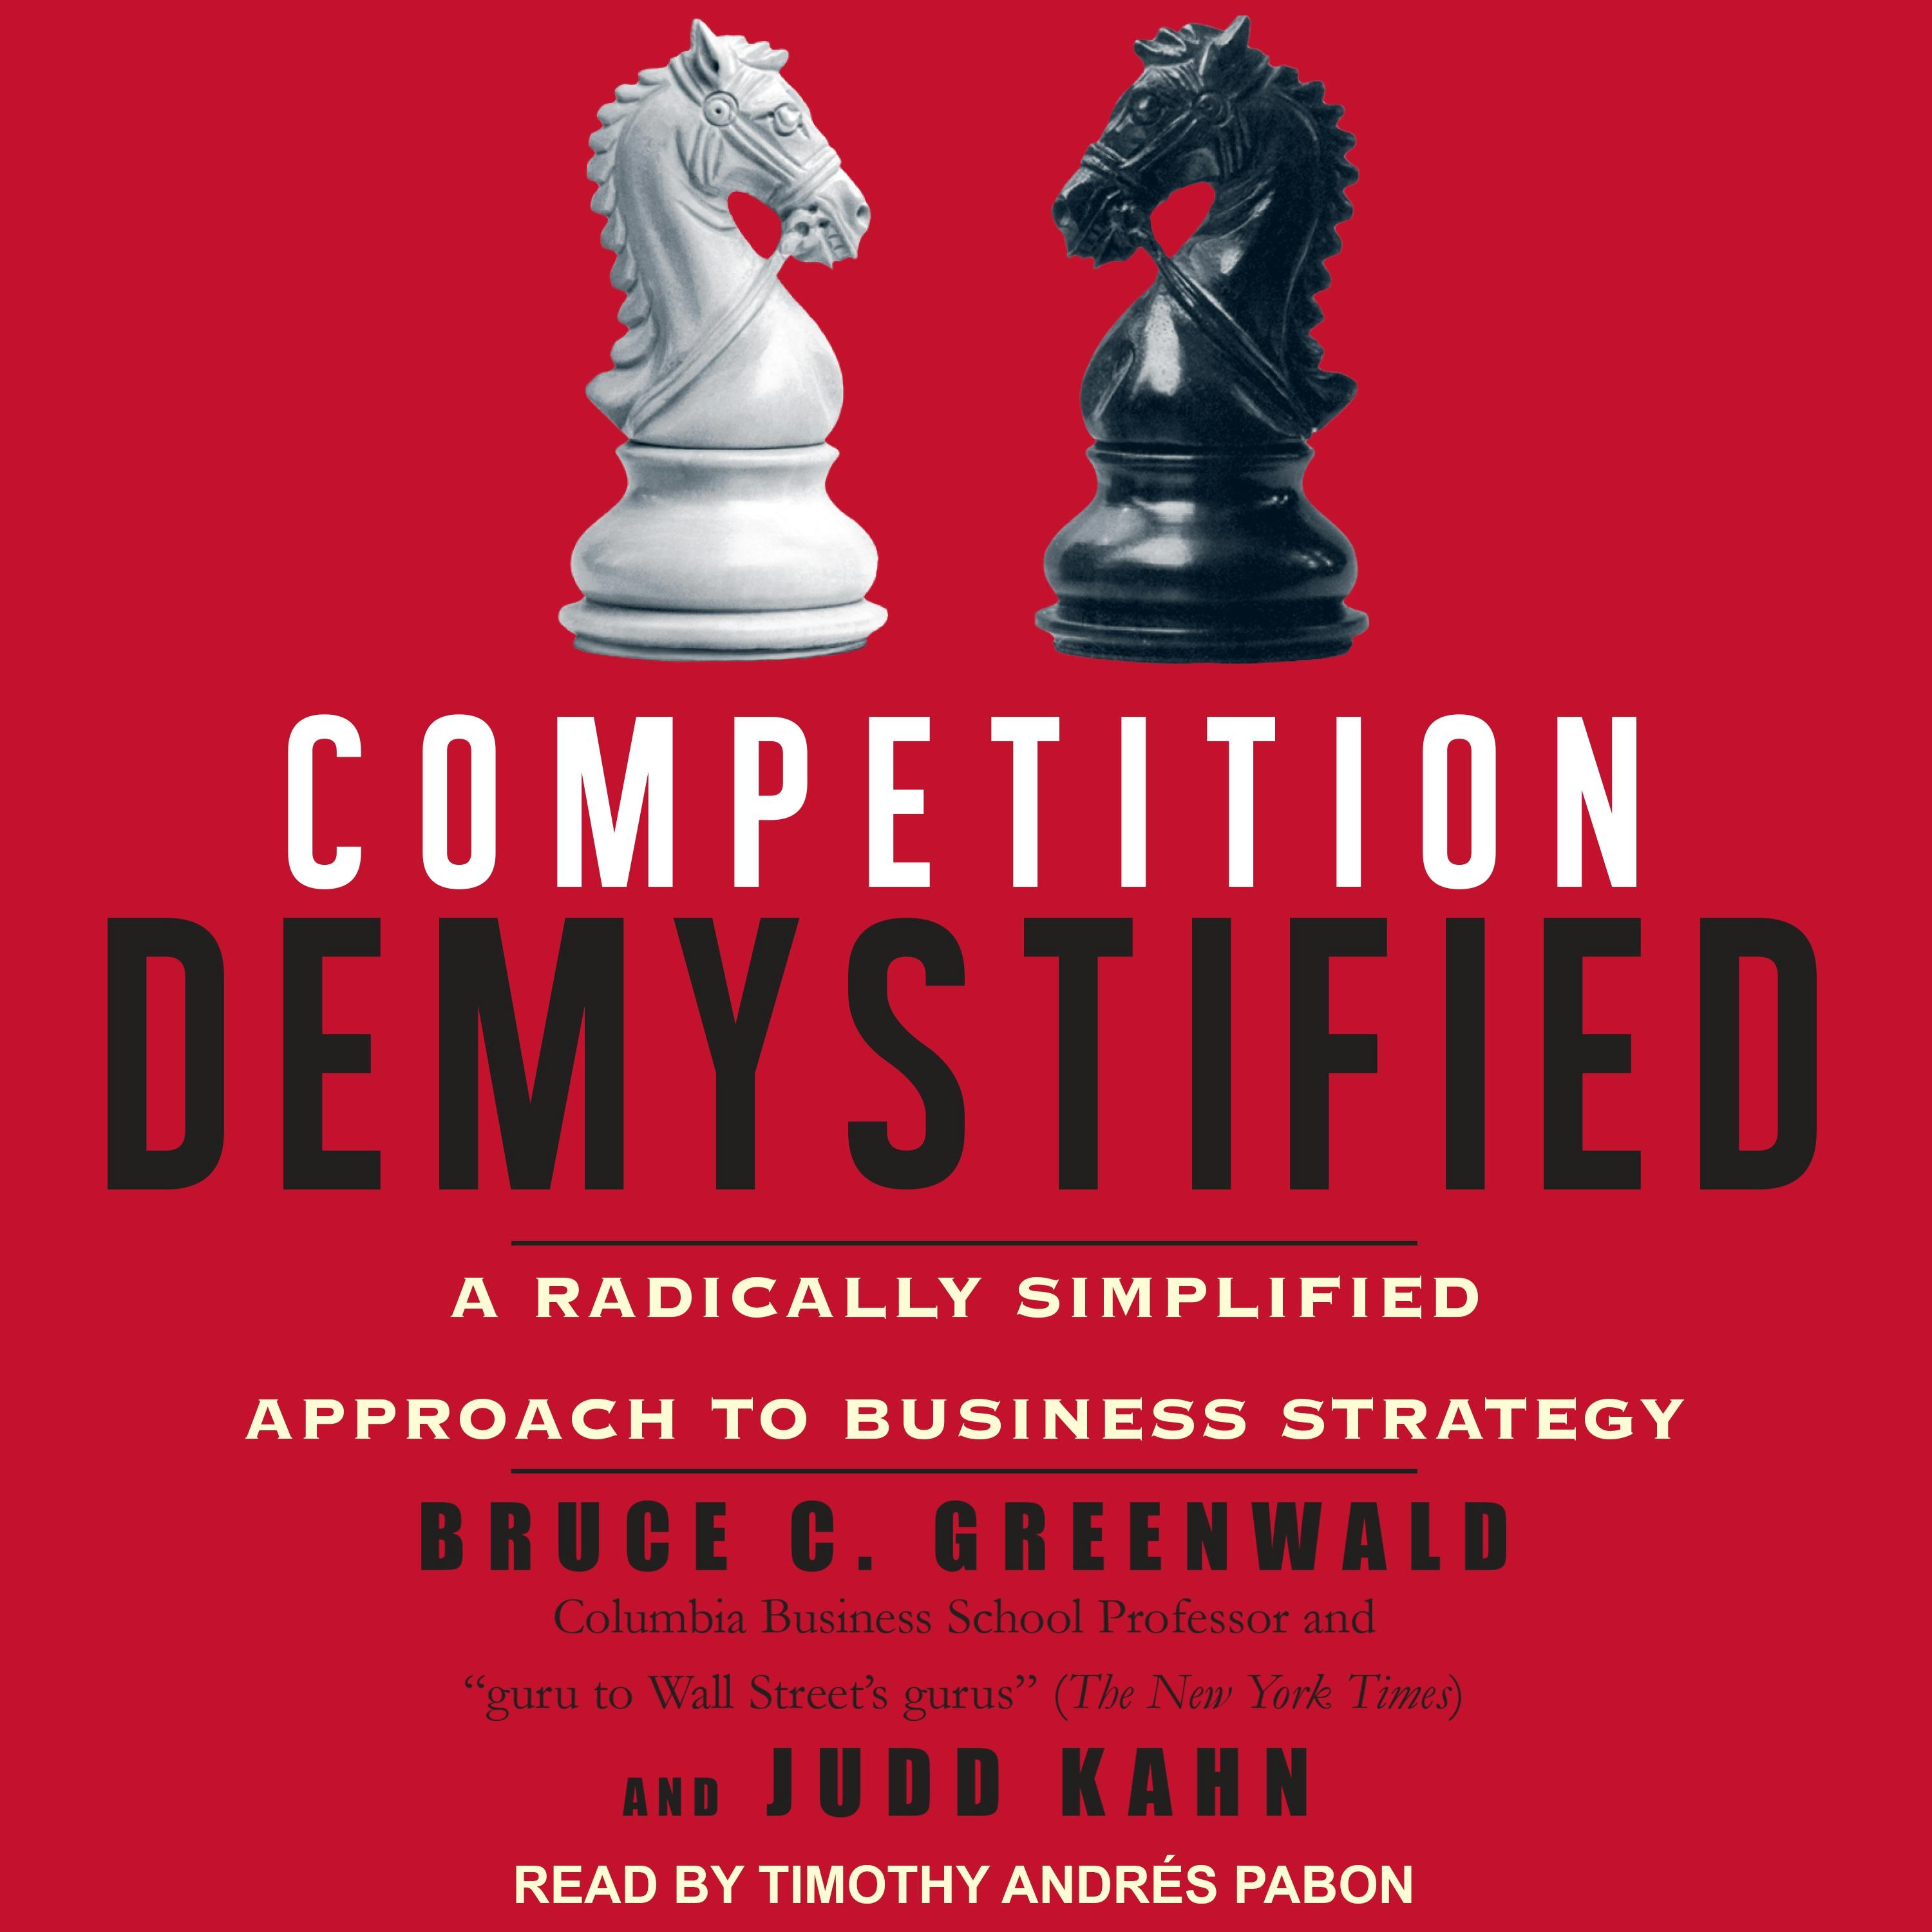 Competition Demystified: A Radically Simplified Approach to Business Strategy - Bruce C. Greenwald, Judd Kahn